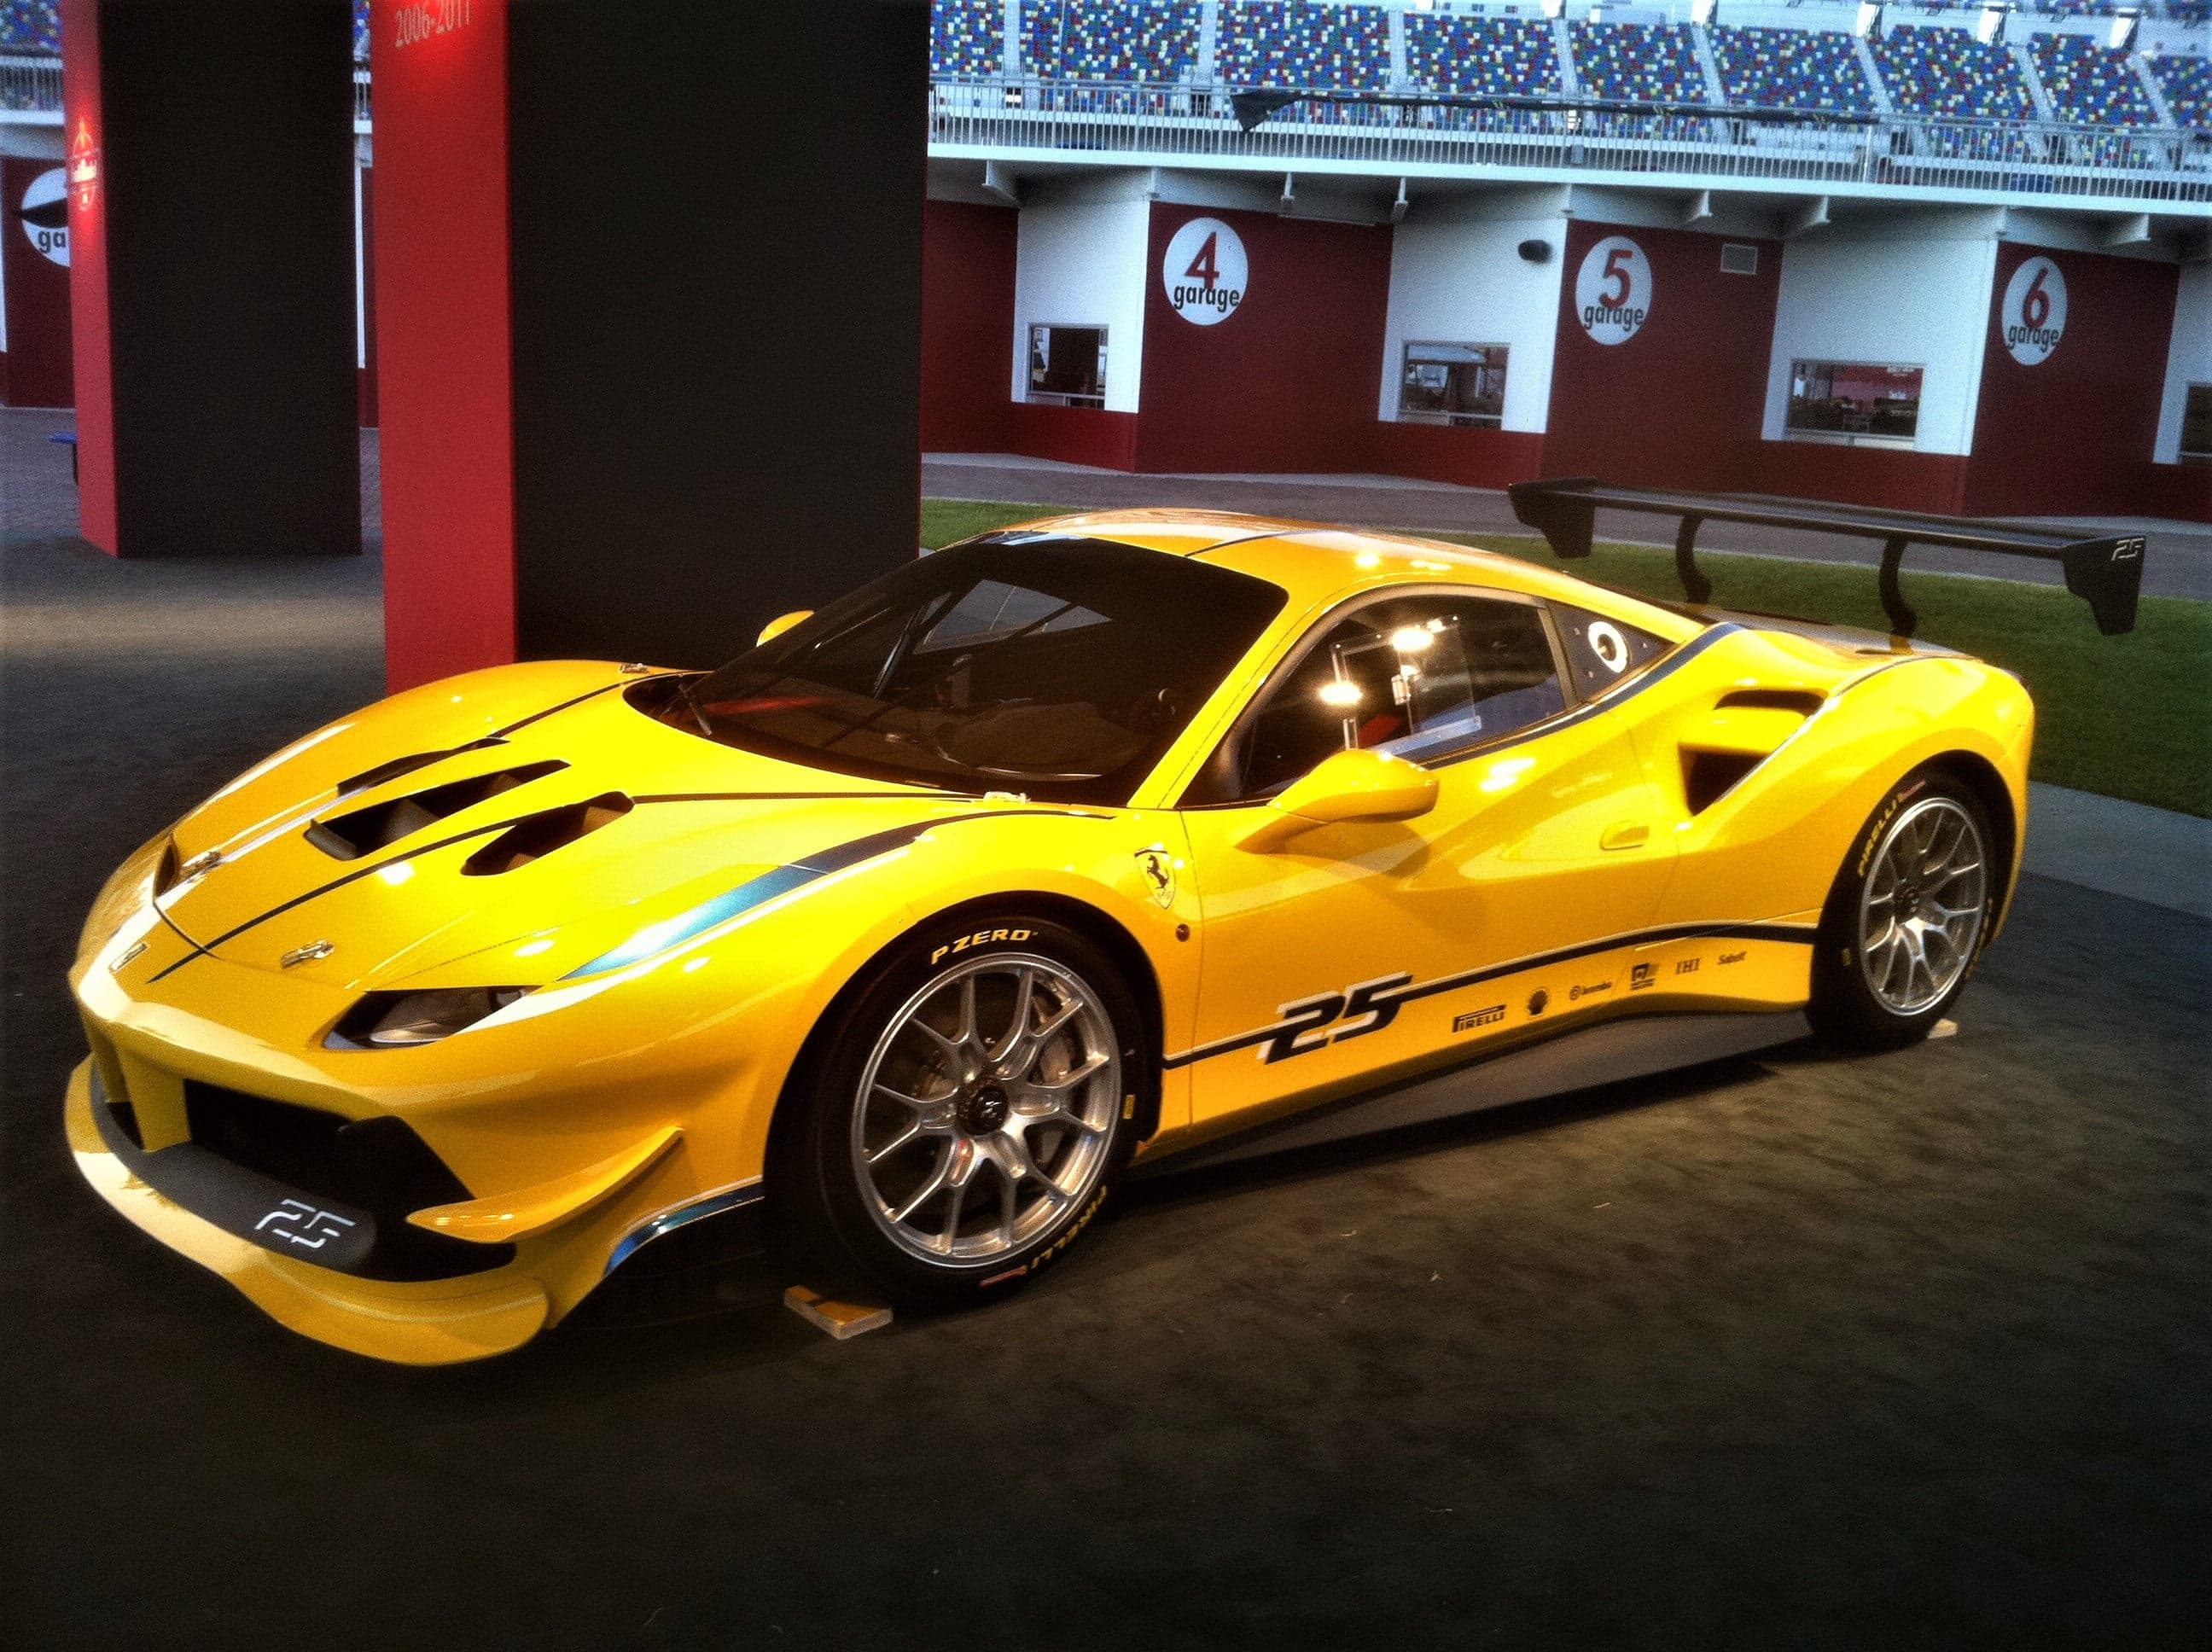 The 2017 Ferrari 488 Challenge Race Car: One More Reason to Play the Lottery